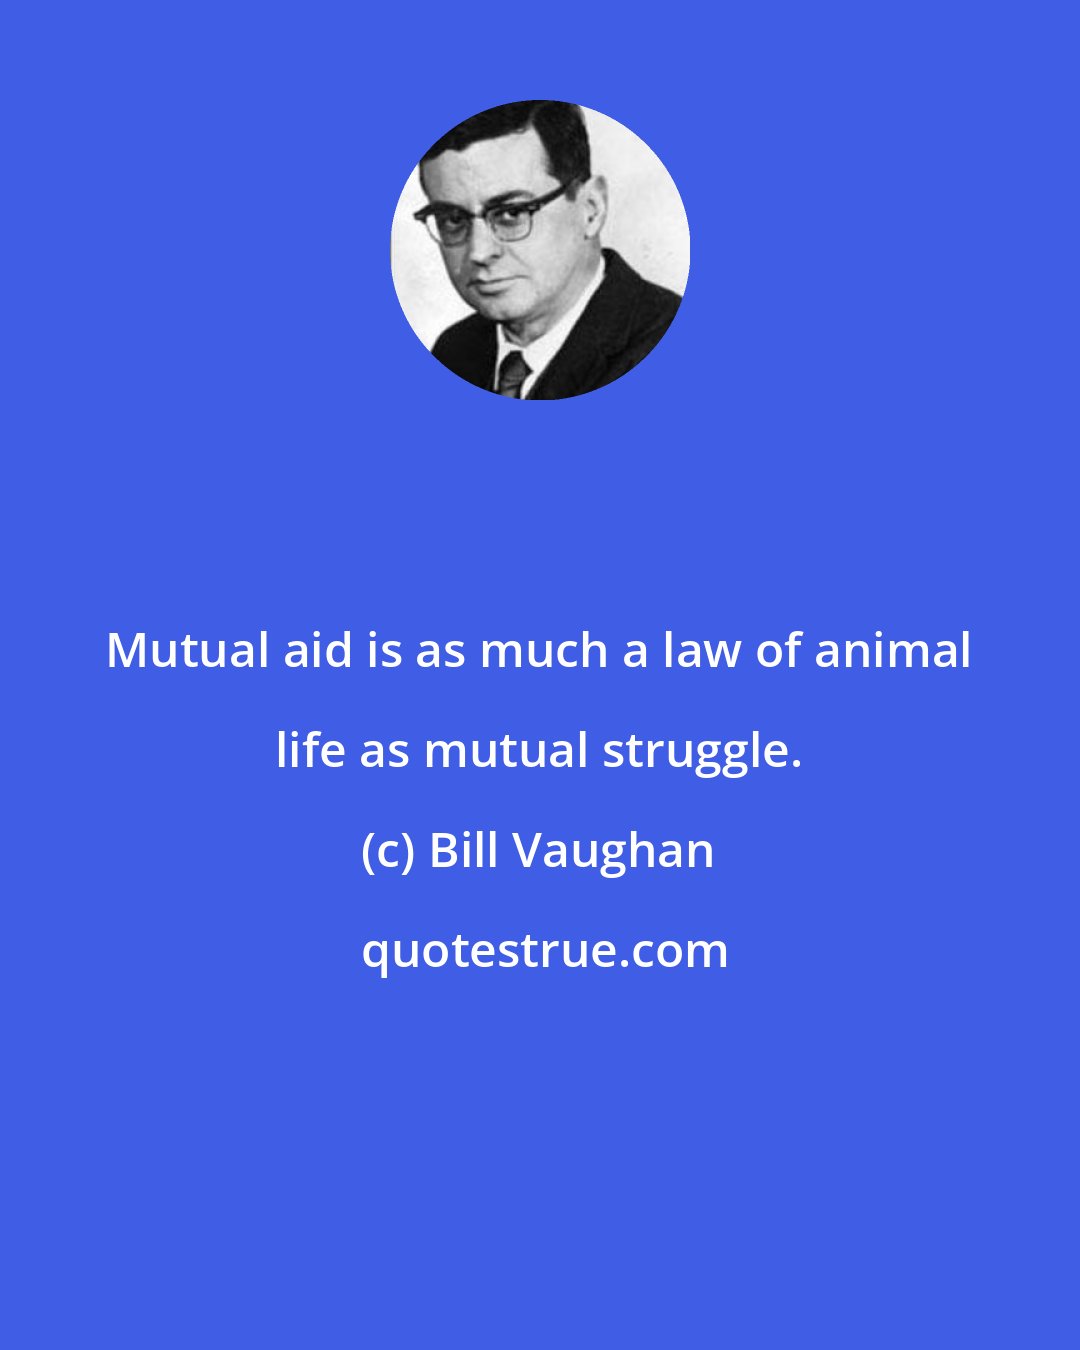 Bill Vaughan: Mutual aid is as much a law of animal life as mutual struggle.